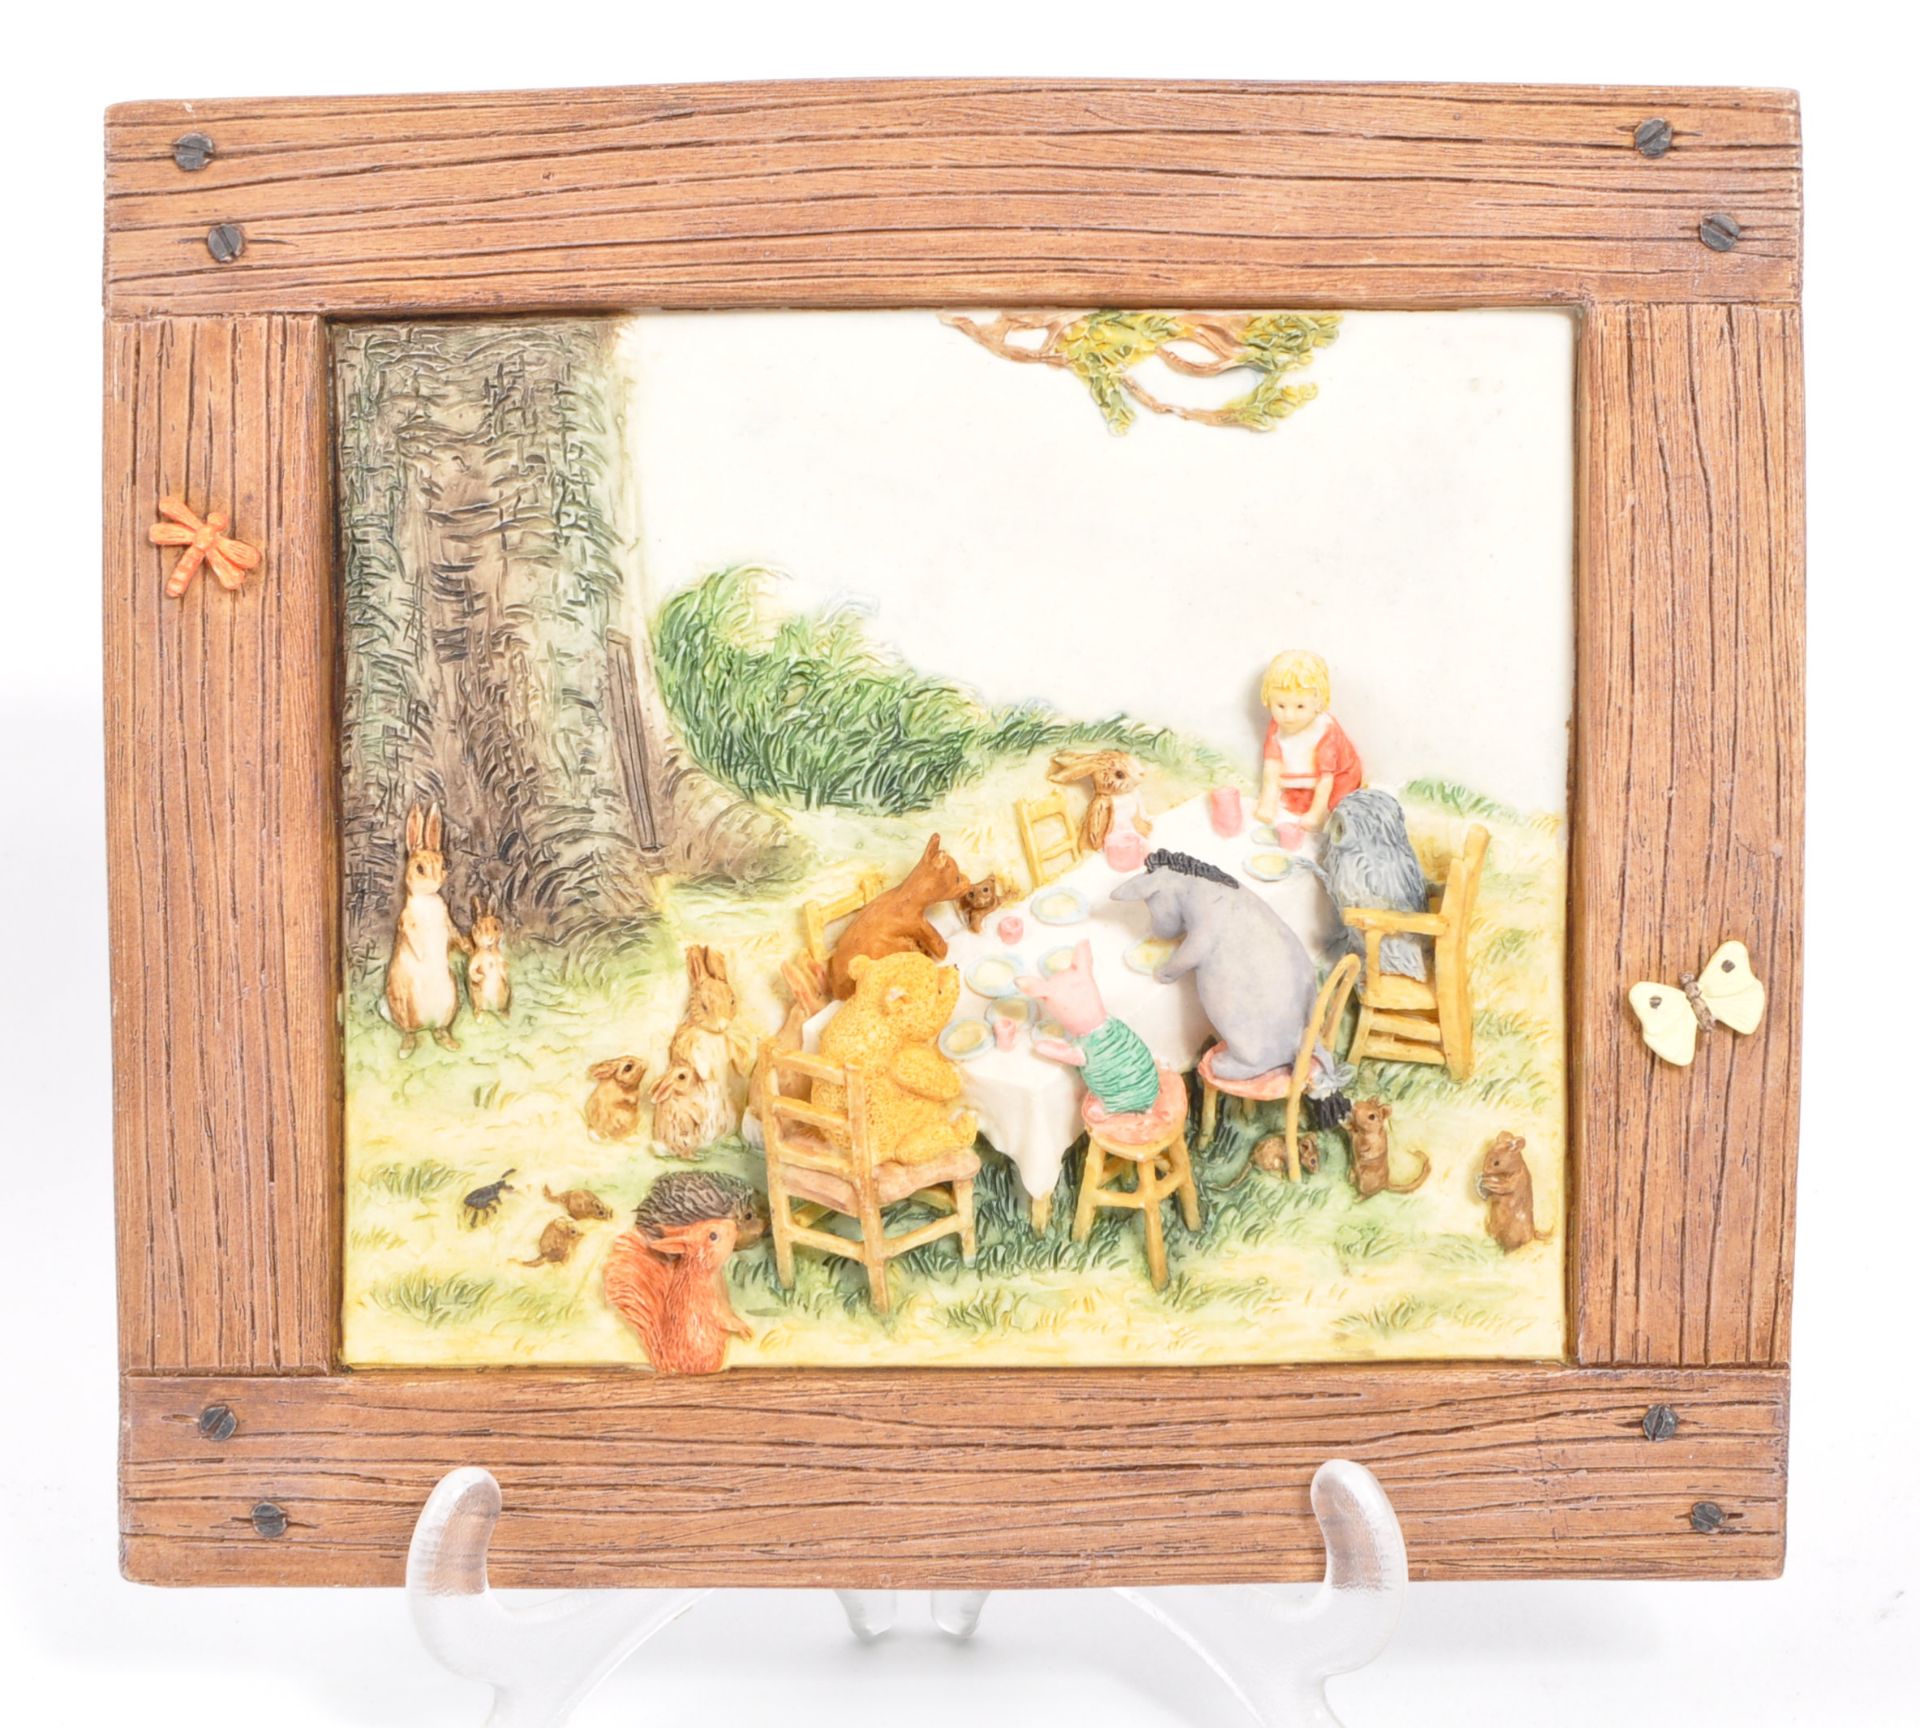 POOH DISNEY MUSICAL SNOW GLOBE & POOH PARTY WALL PLAQUE - Image 7 of 9